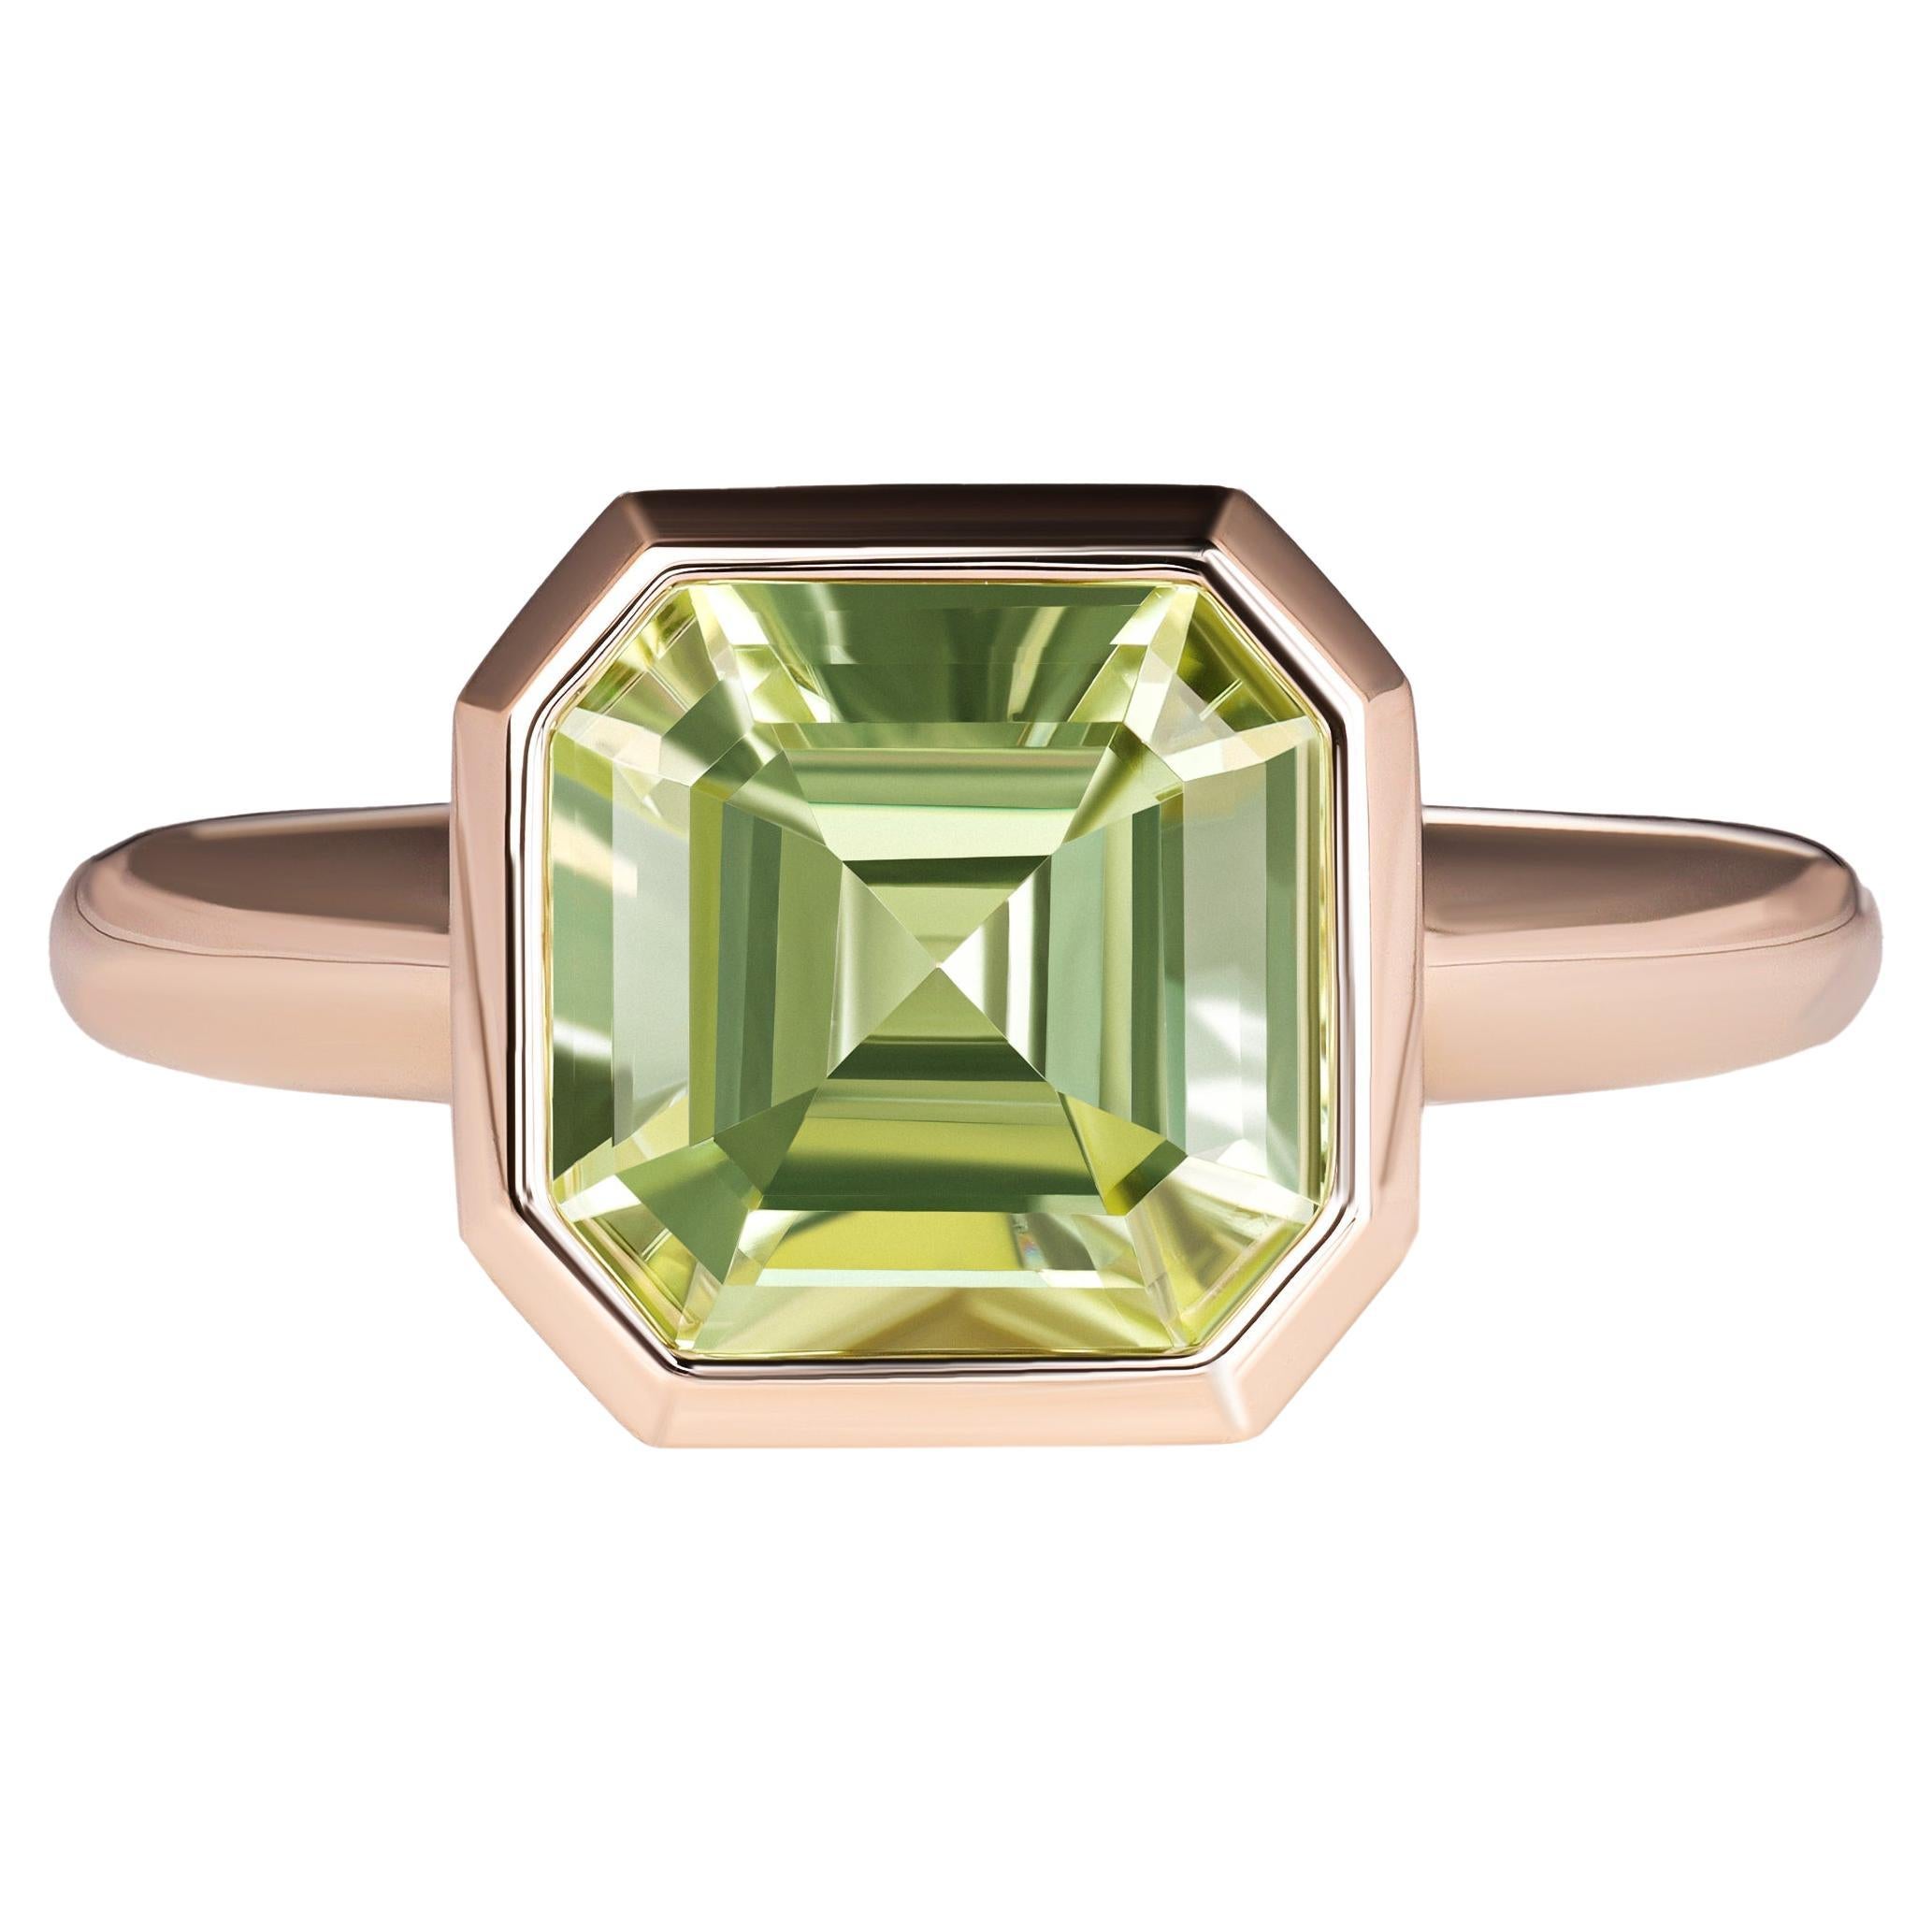  Mint Tourmaline 5.13 ct Ring in 18K Gold Champagne Color